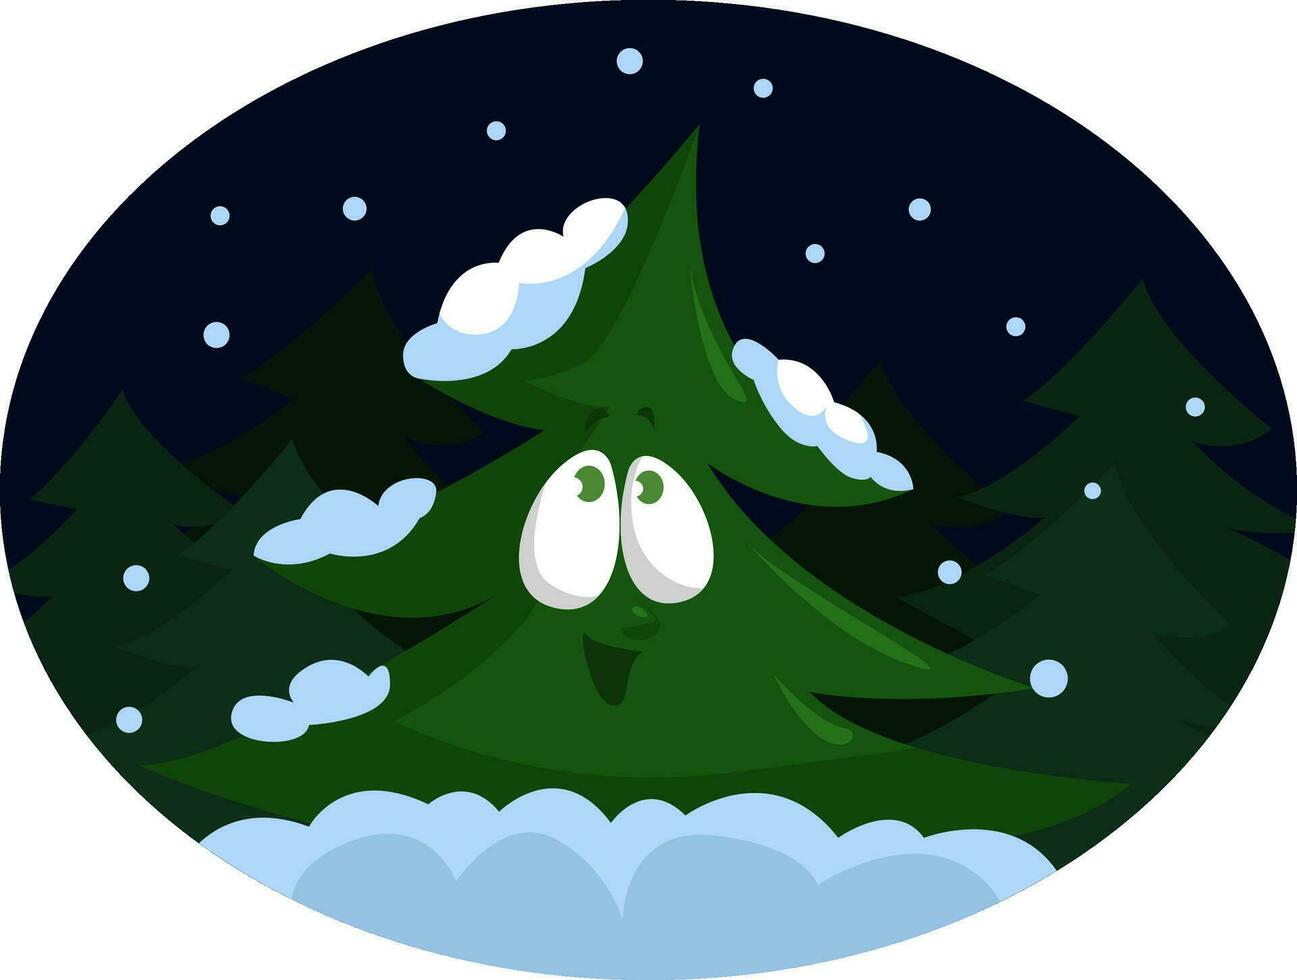 Winter forest, illustration, vector on a white background.